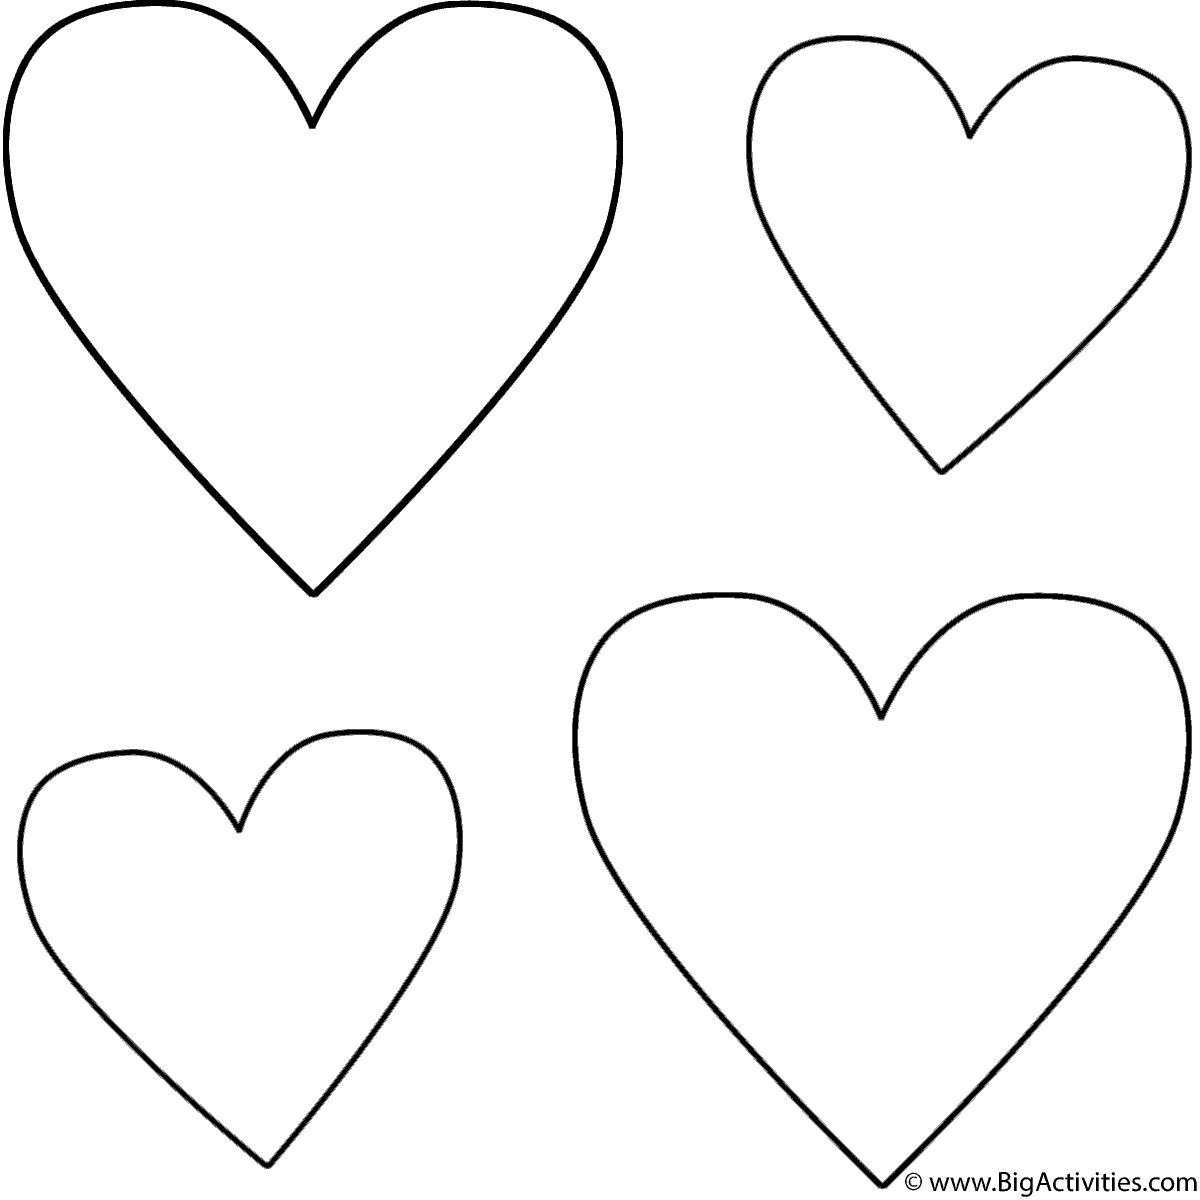 Four Hearts - Coloring Page (Valentine's Day)